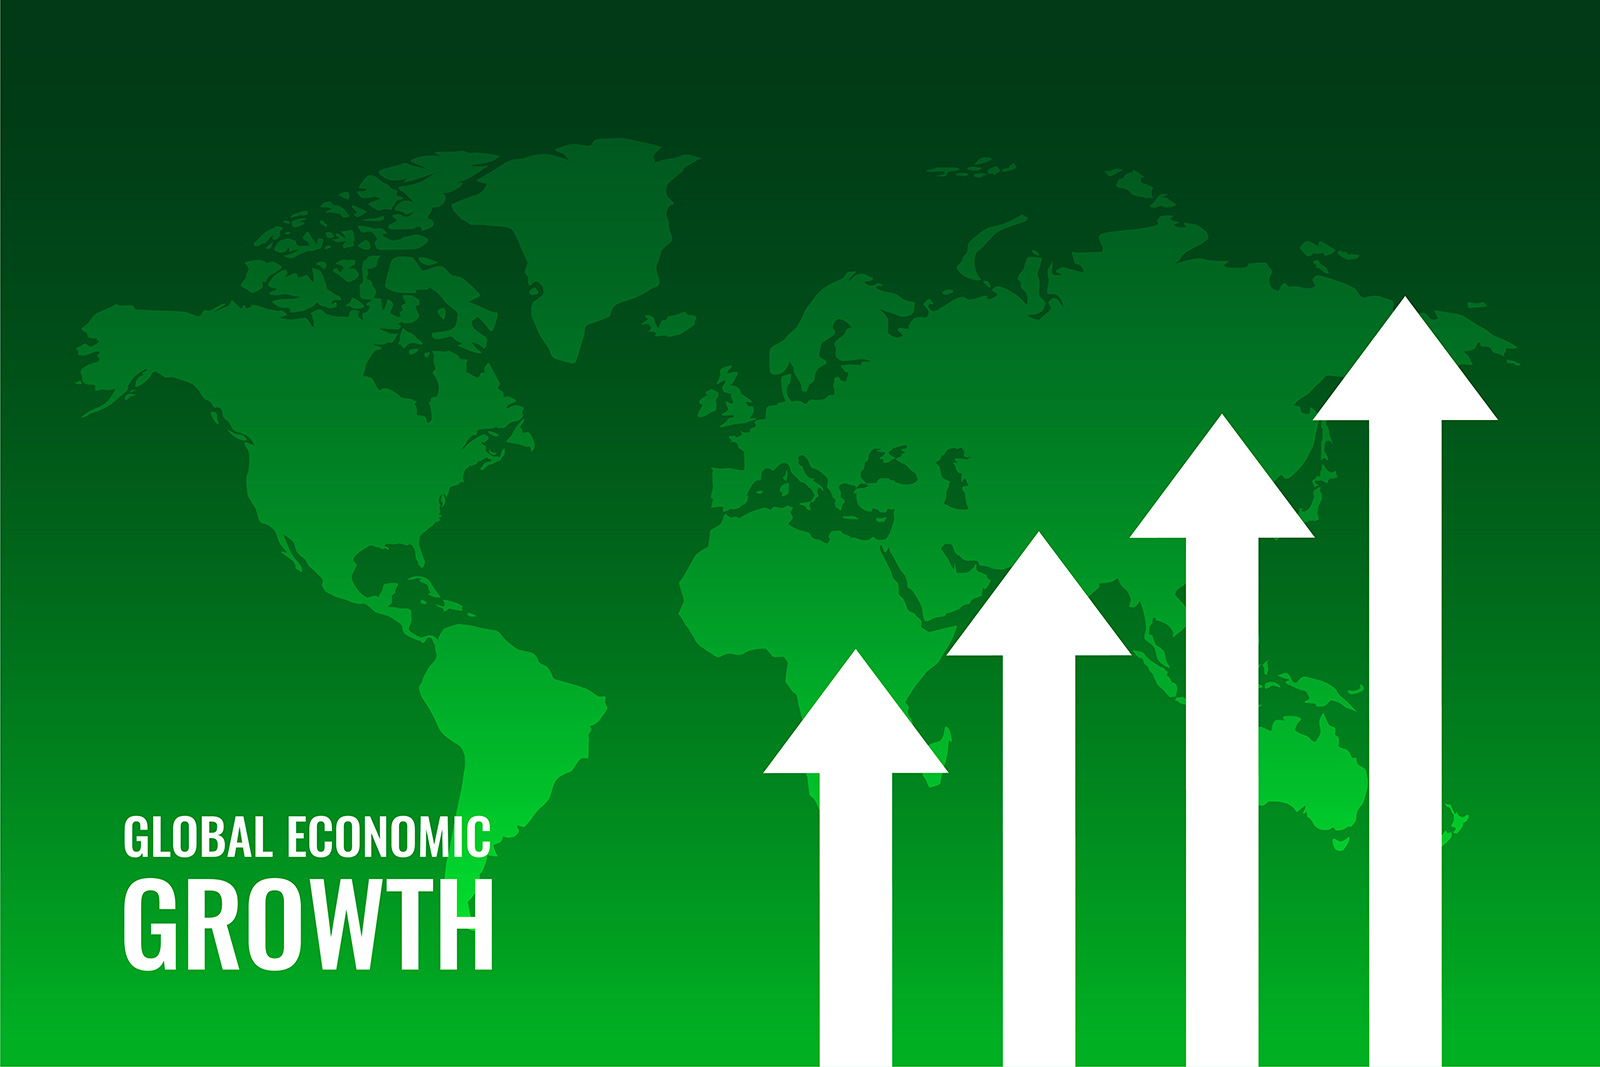 A strategy for more sustainable economic growth